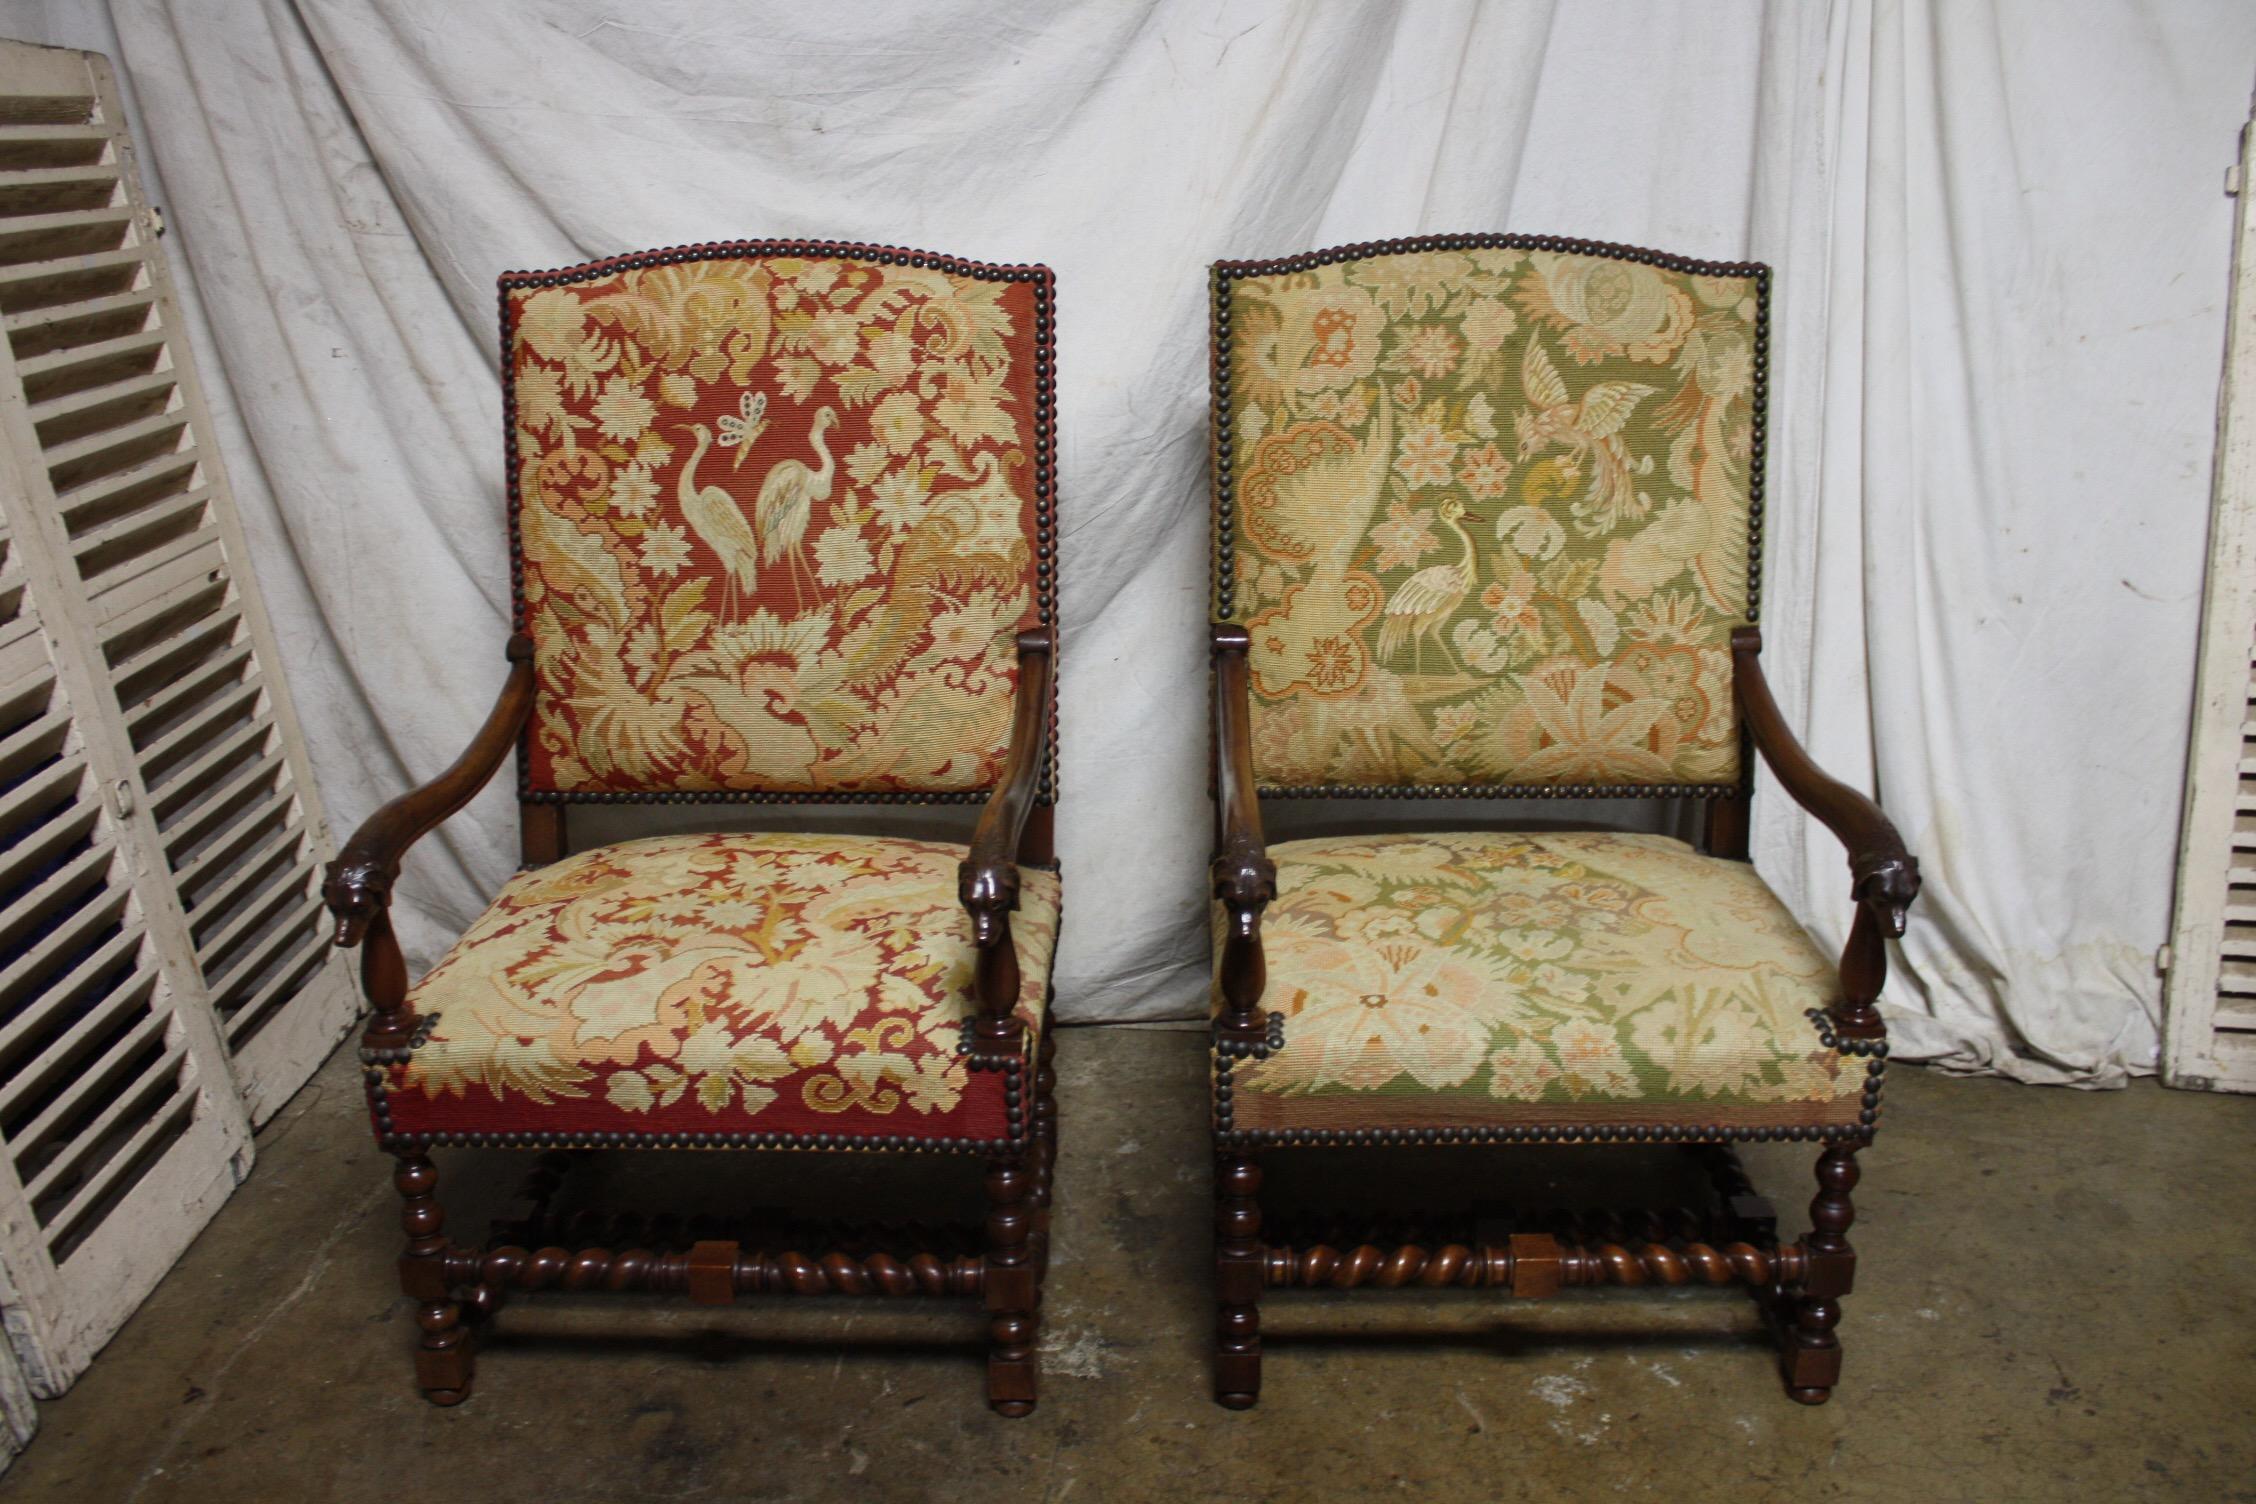 Those armchairs are just amazing by the large size with a beautiful needle point. the end of the arms wears a dog heads. Those kind of chairs were used to be in big properties where they hunting or castle in France.